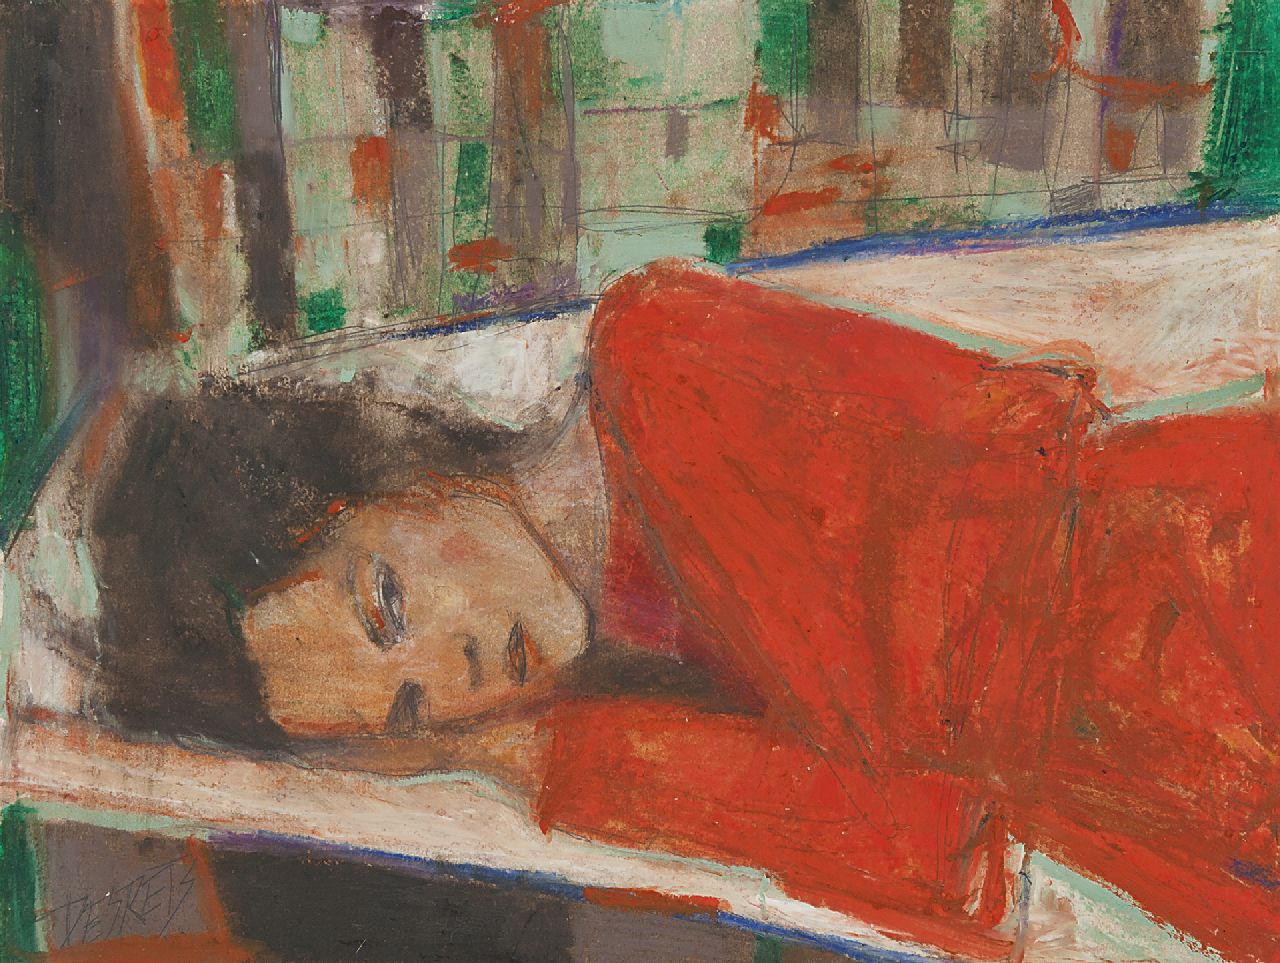 Liliana Desrets | A dormir, Pastell und Öl auf Papier, 25,0 x 32,1 cm, signed l.l. and on the reverse und executed in 2010